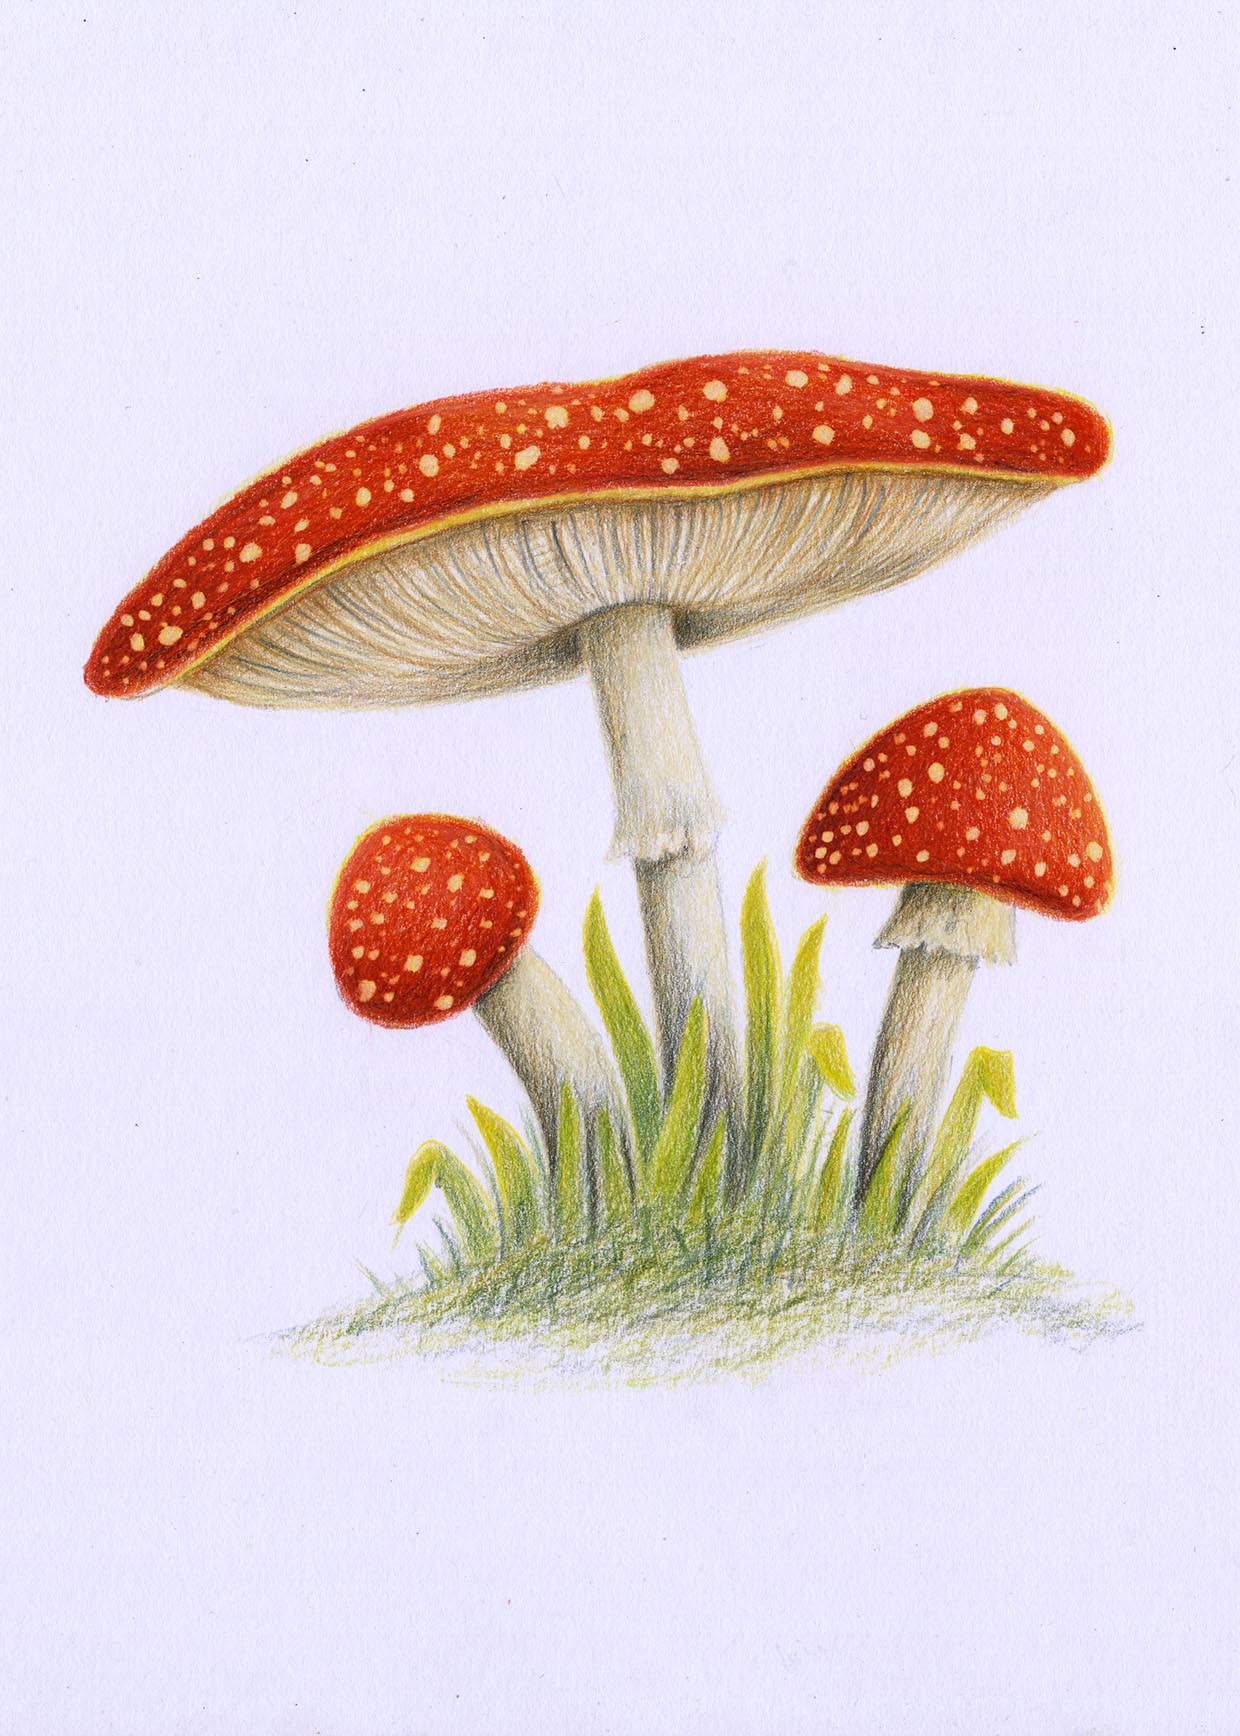 Mushroom Design - Cute mushroom drawing for children and design projects -  CleanPNG / KissPNG